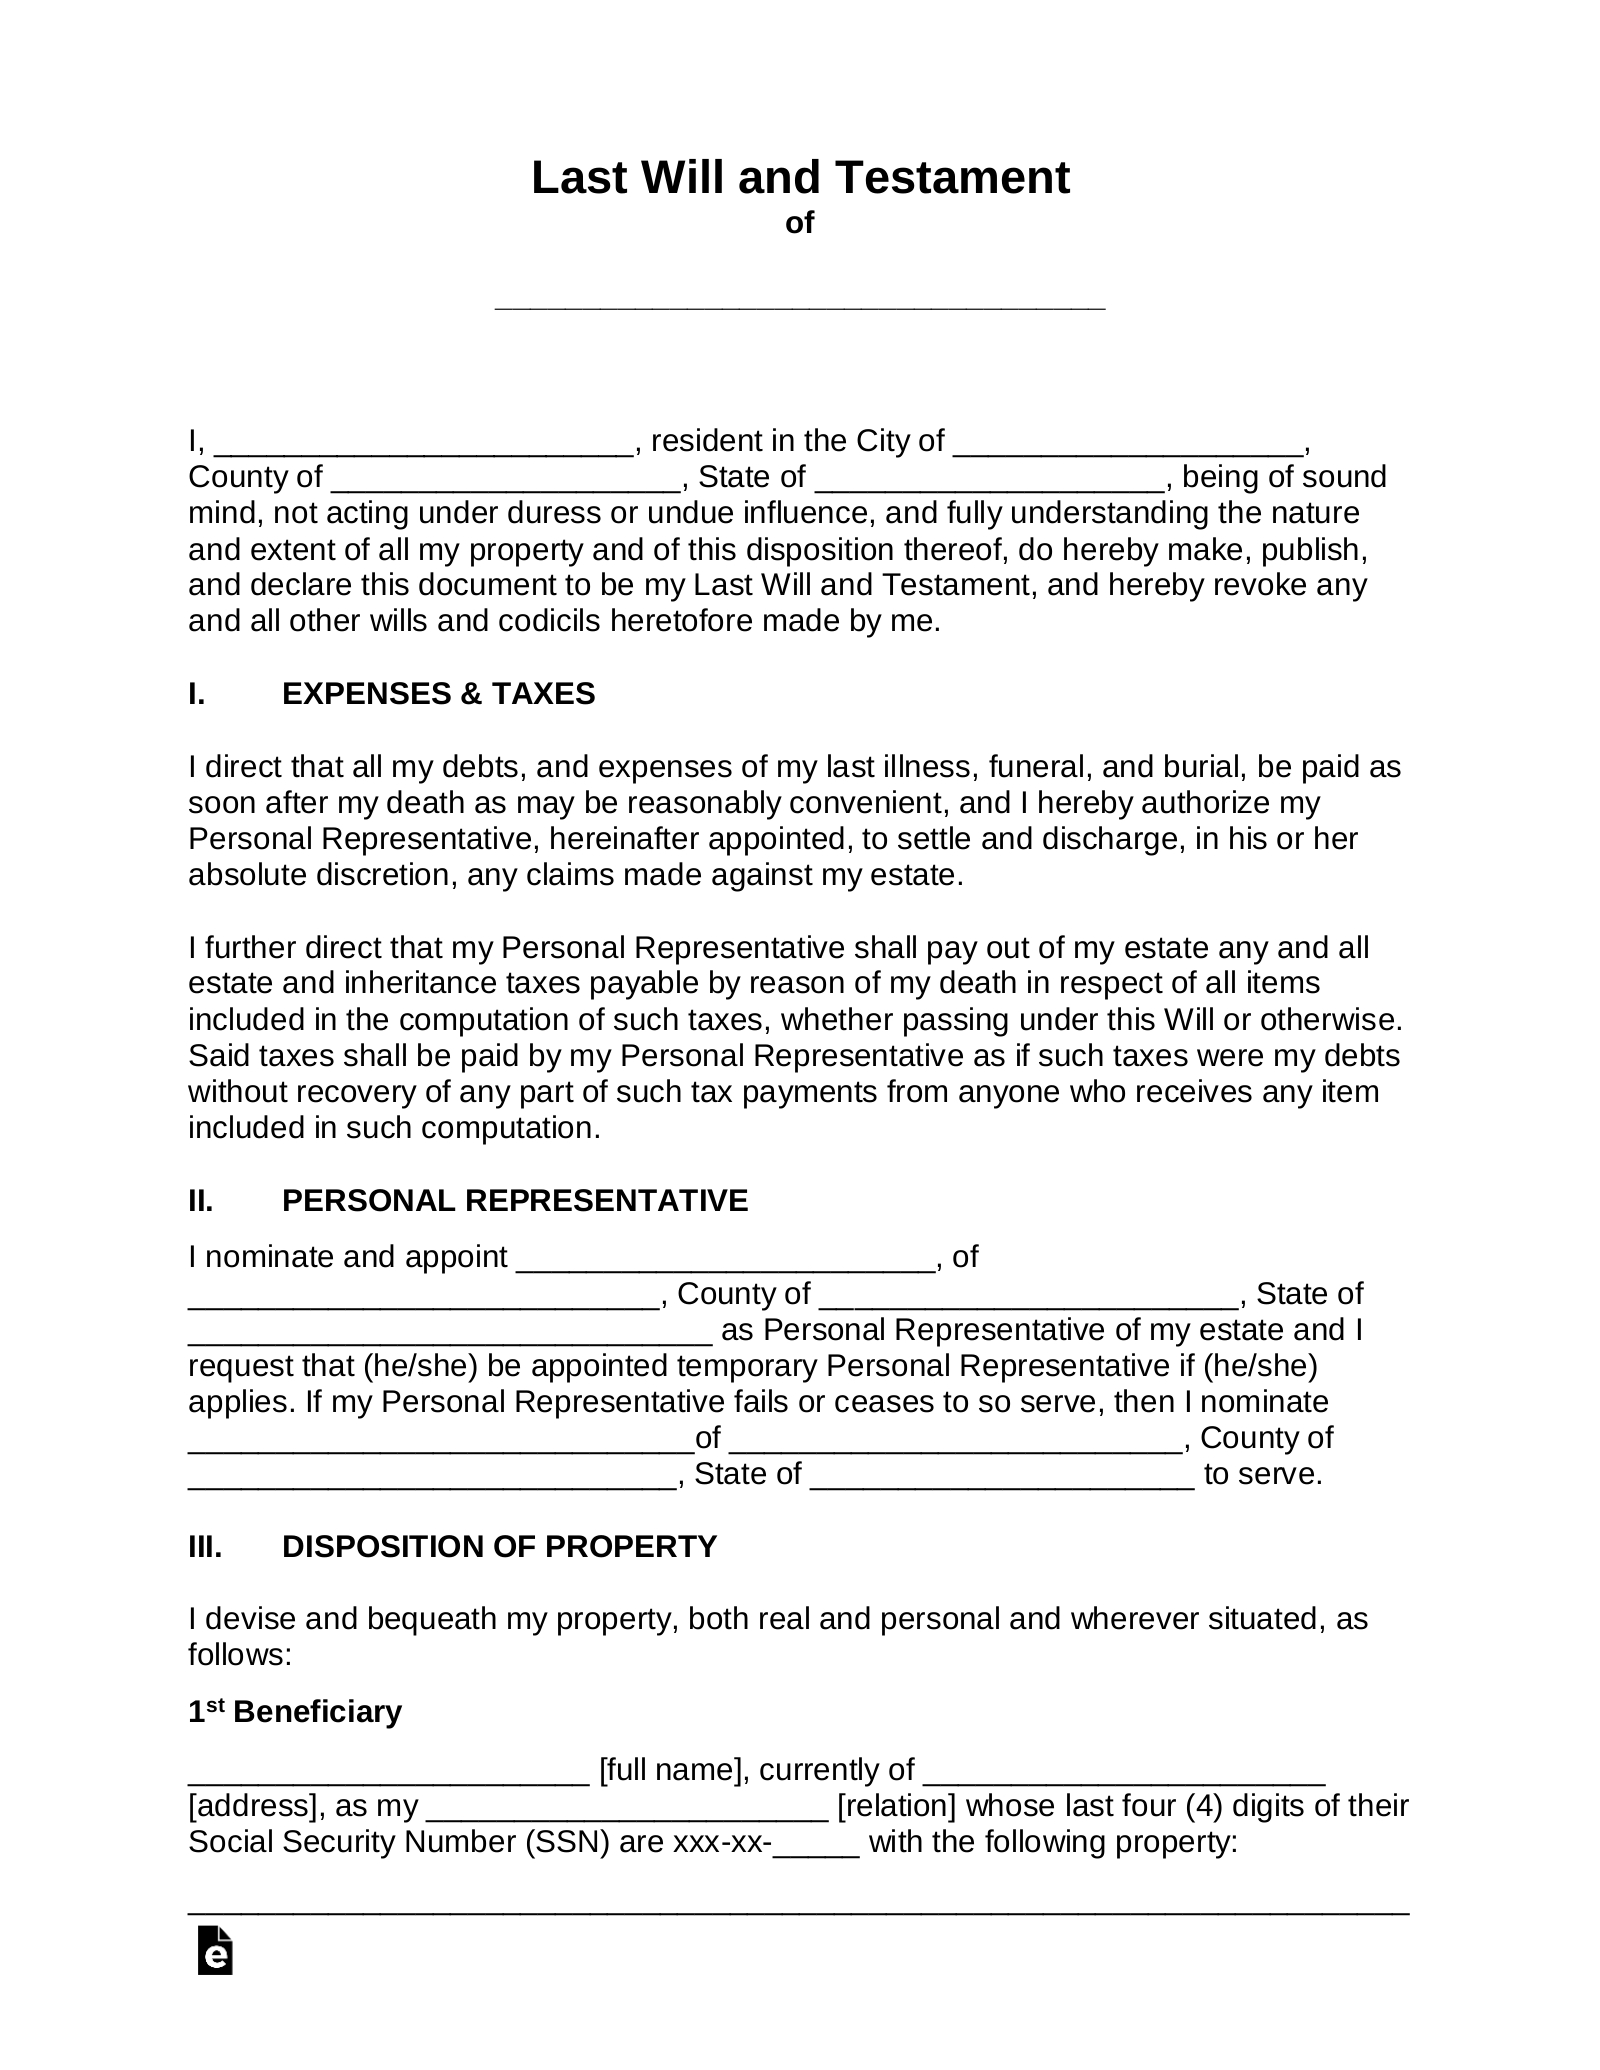 Free Last Will And Testament (Will) - Pdf | Word – Eforms - Free Printable Will Forms Uk